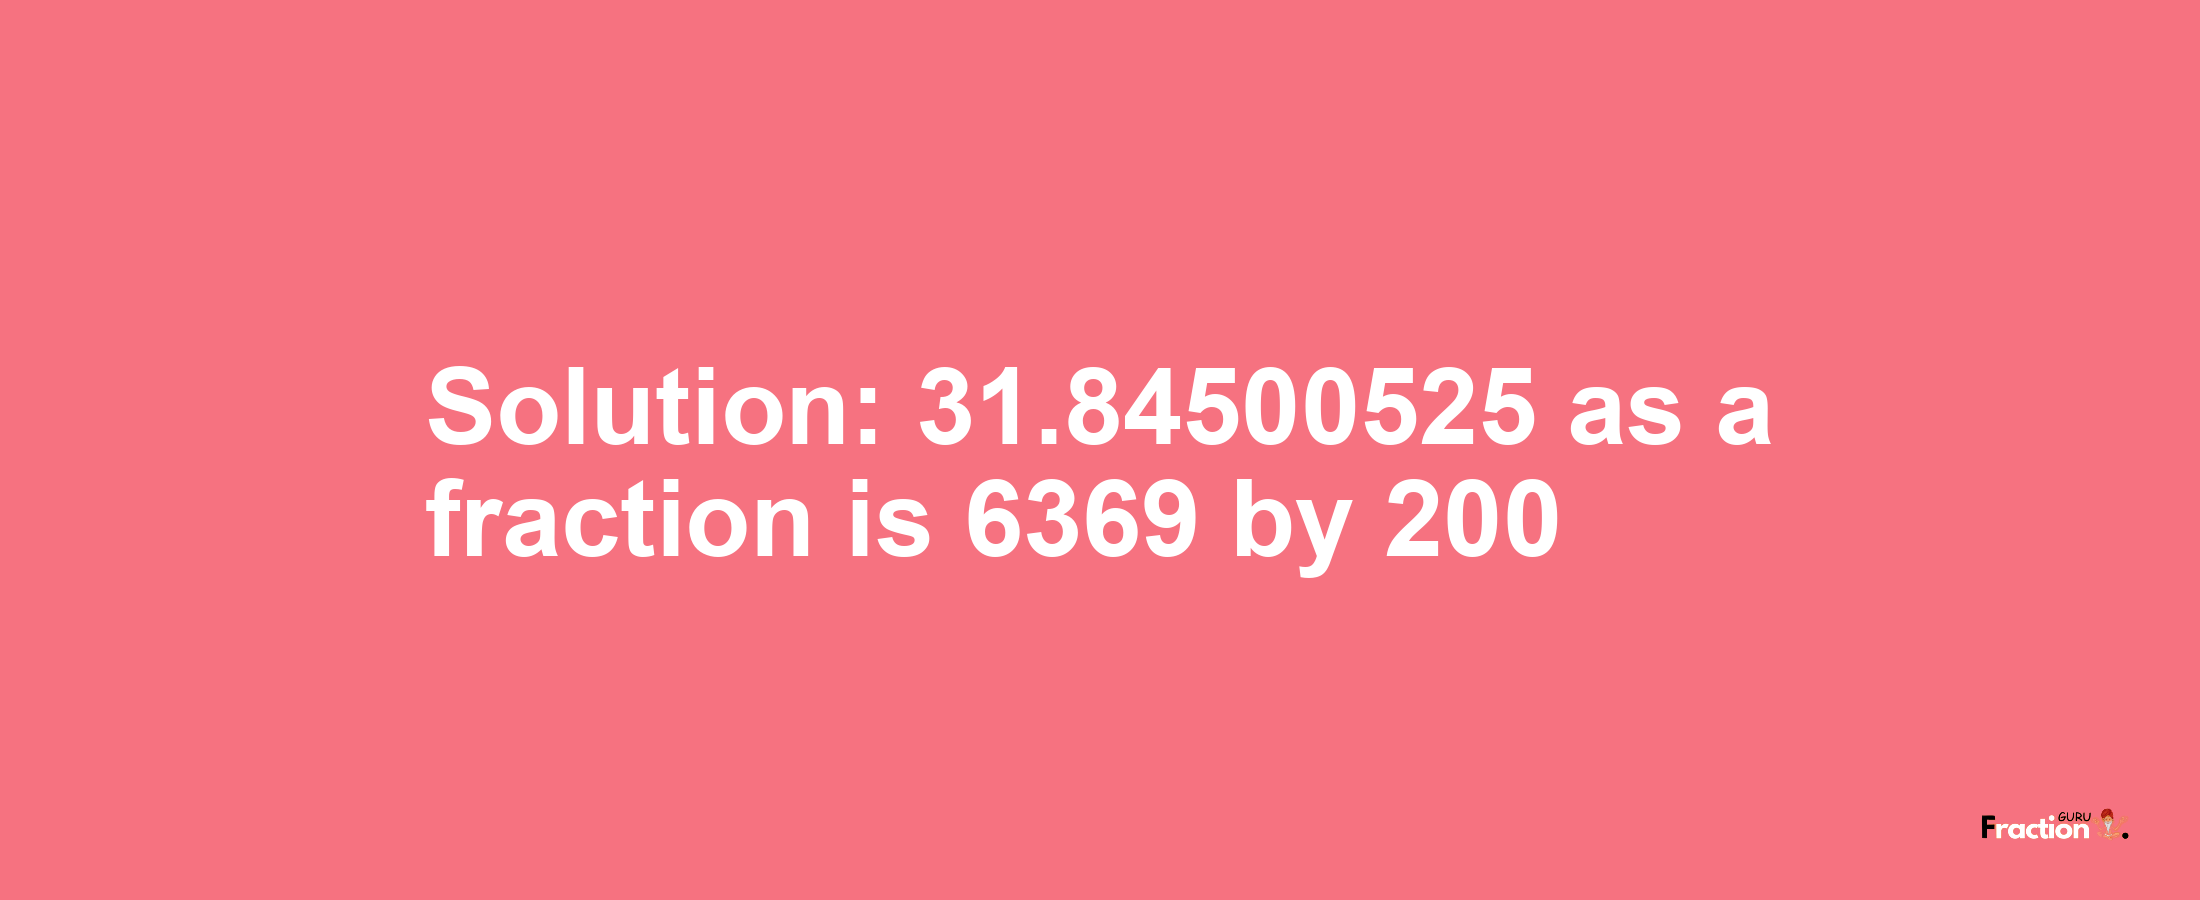 Solution:31.84500525 as a fraction is 6369/200